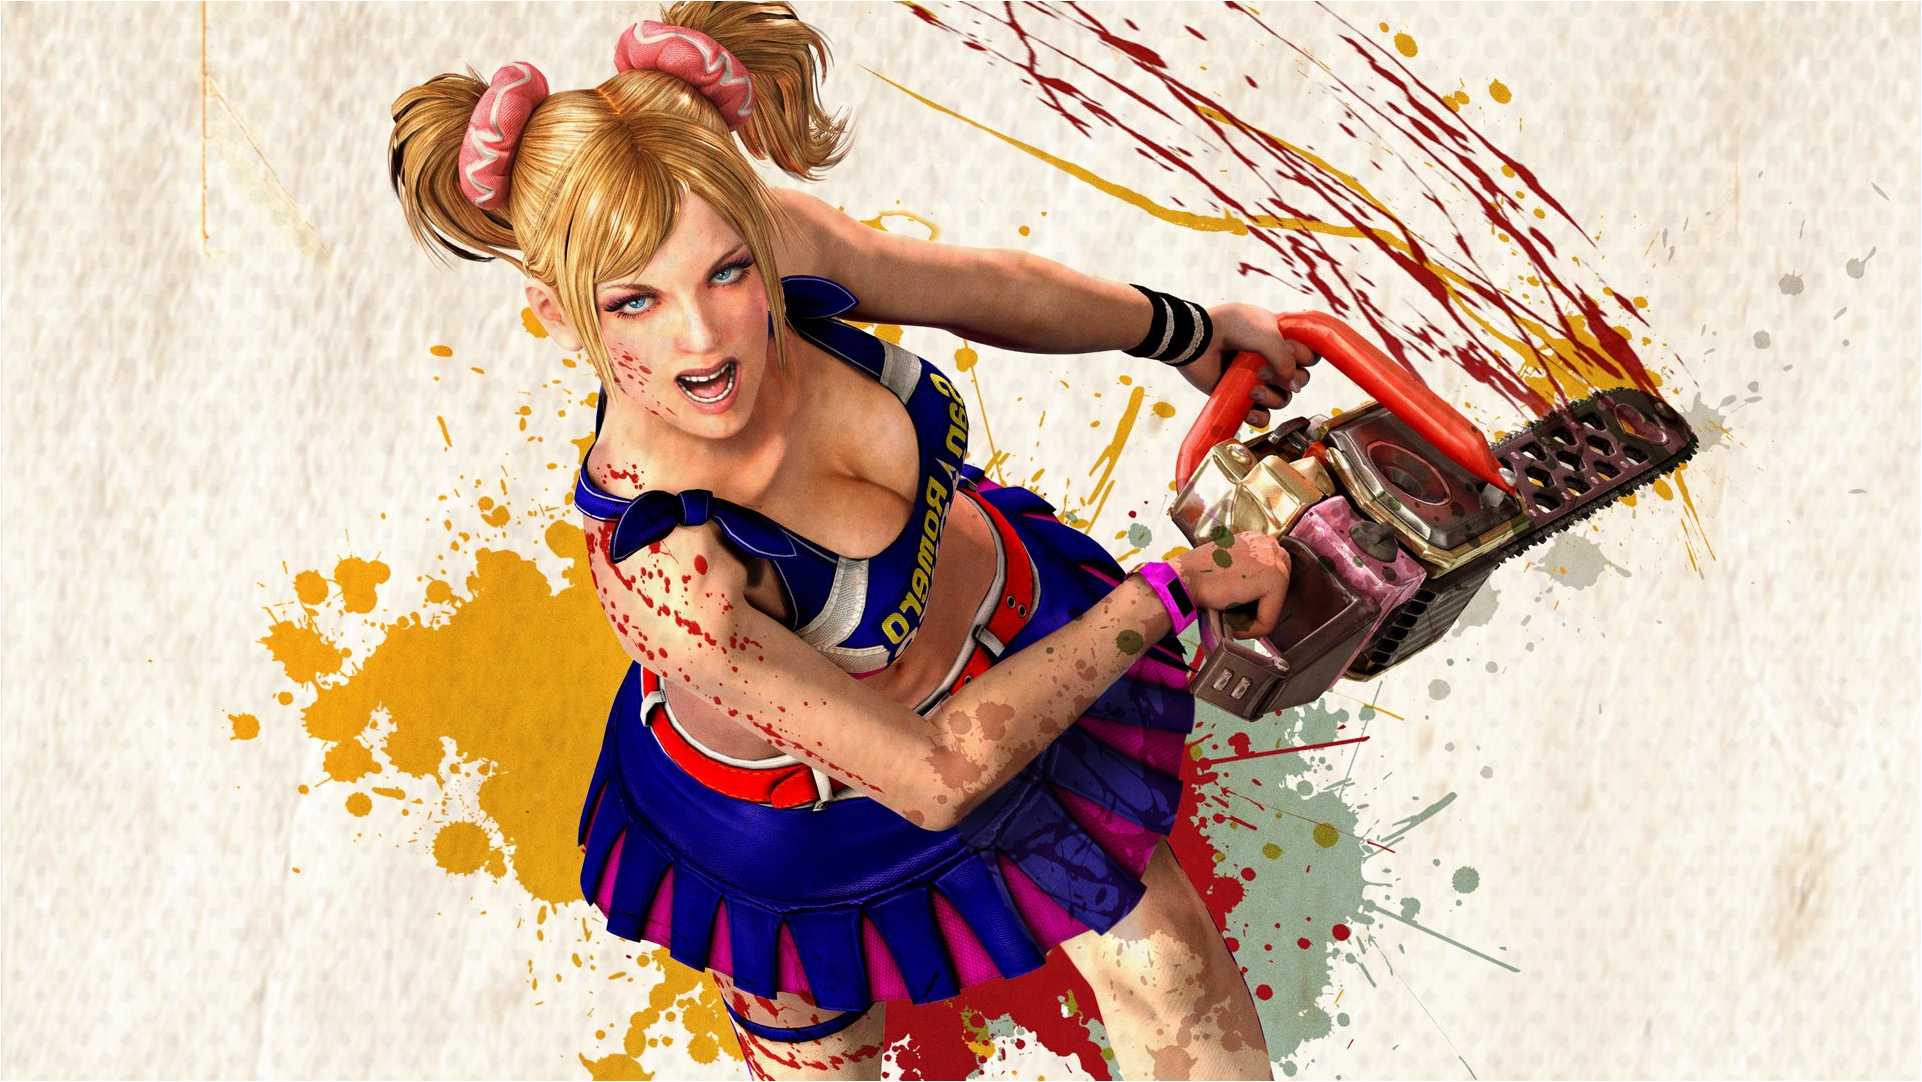 Lollipop Chainsaw Remake will be coming next year